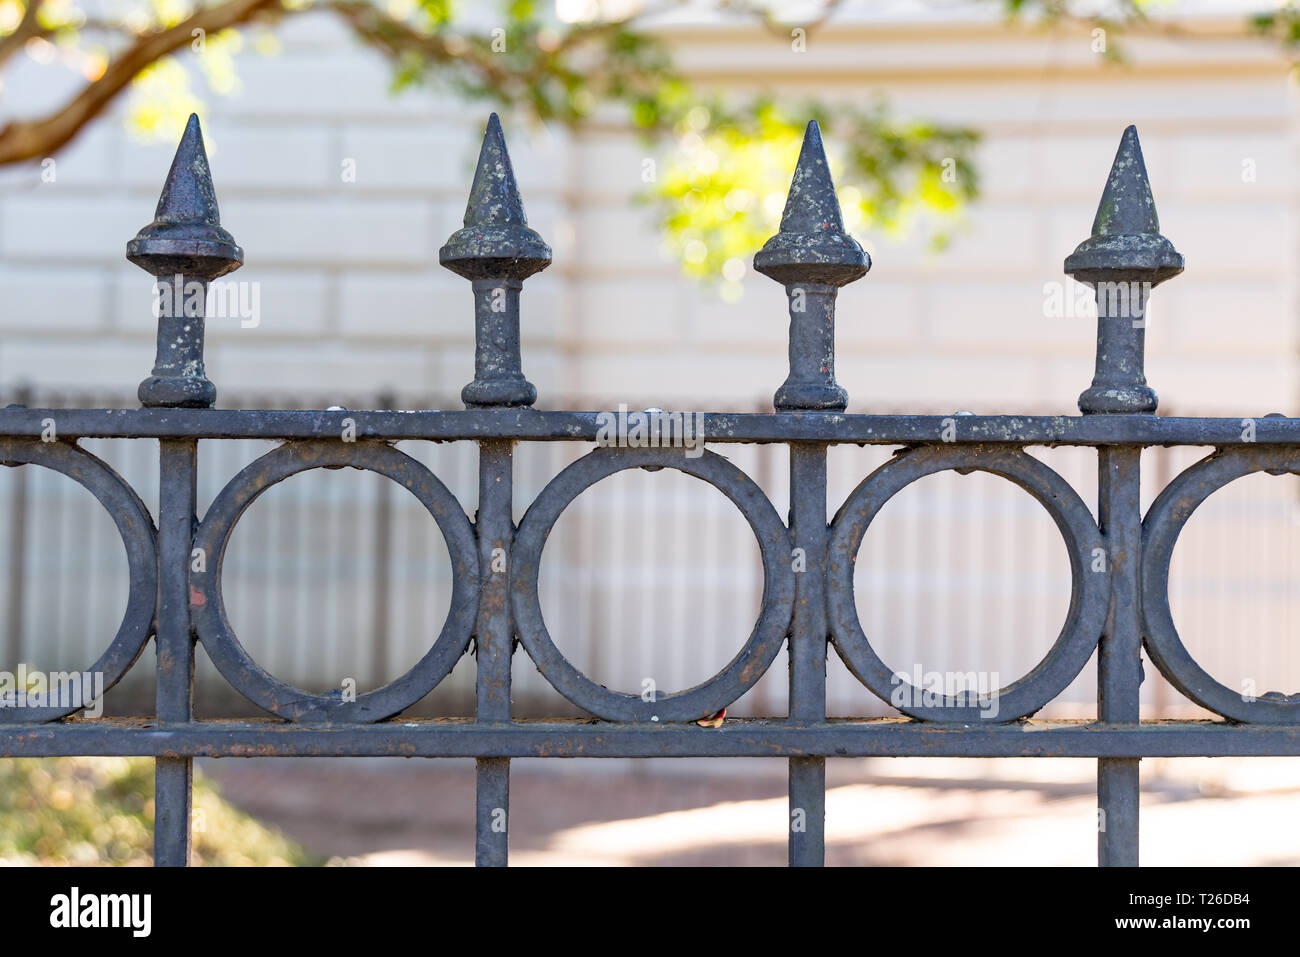 Detail of the top of an ornate iron fence Stock Photo